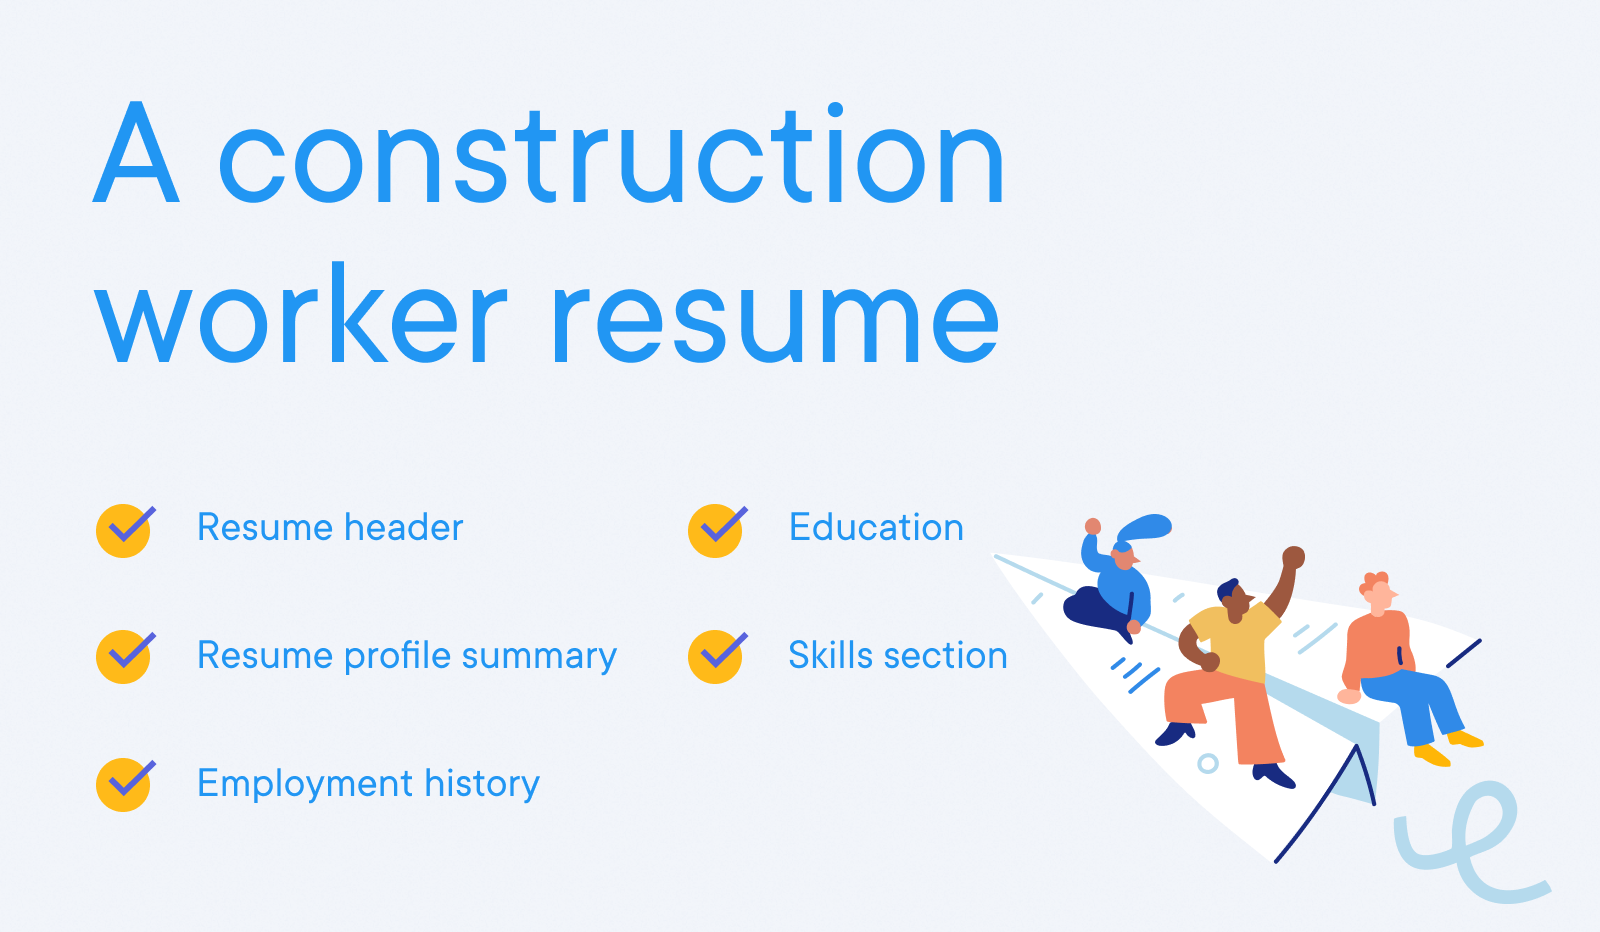 Construction Worker - A construction worker resume